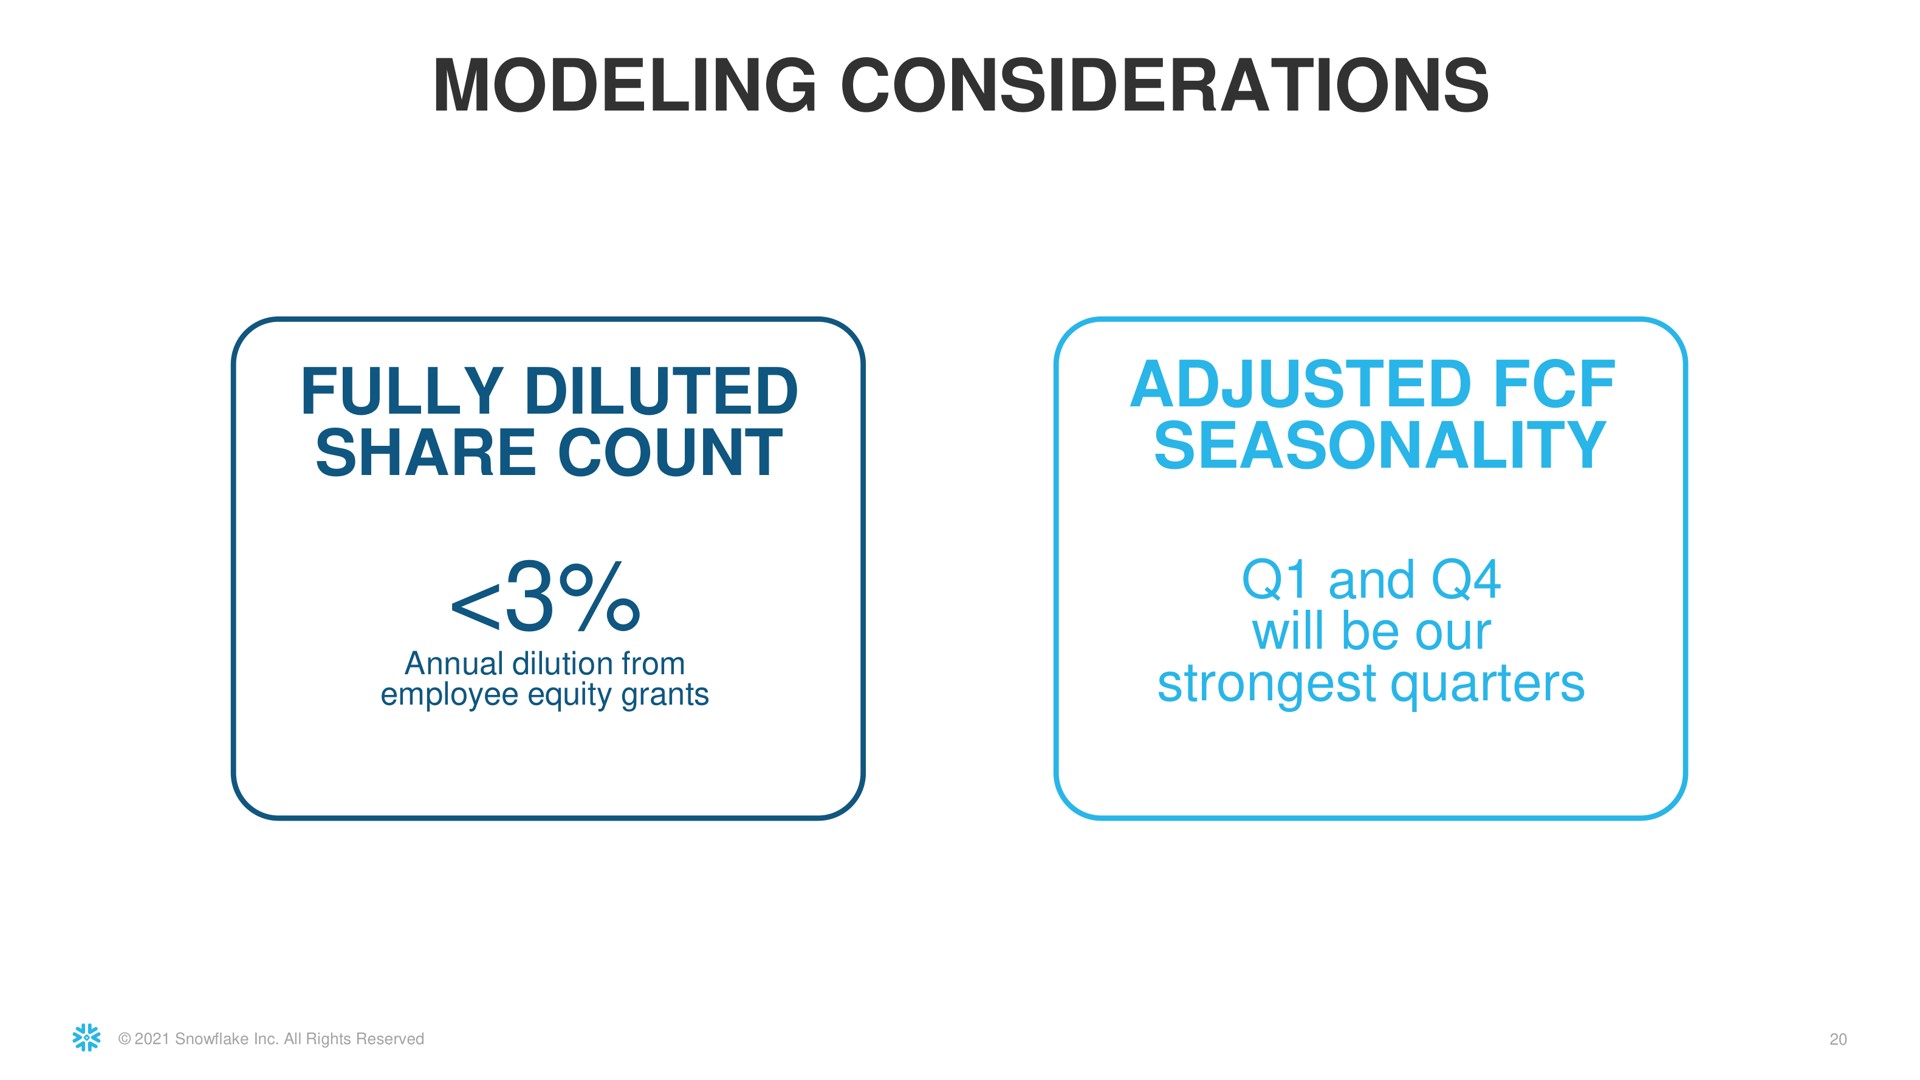 modeling considerations fully diluted share count adjusted seasonality | Snowflake